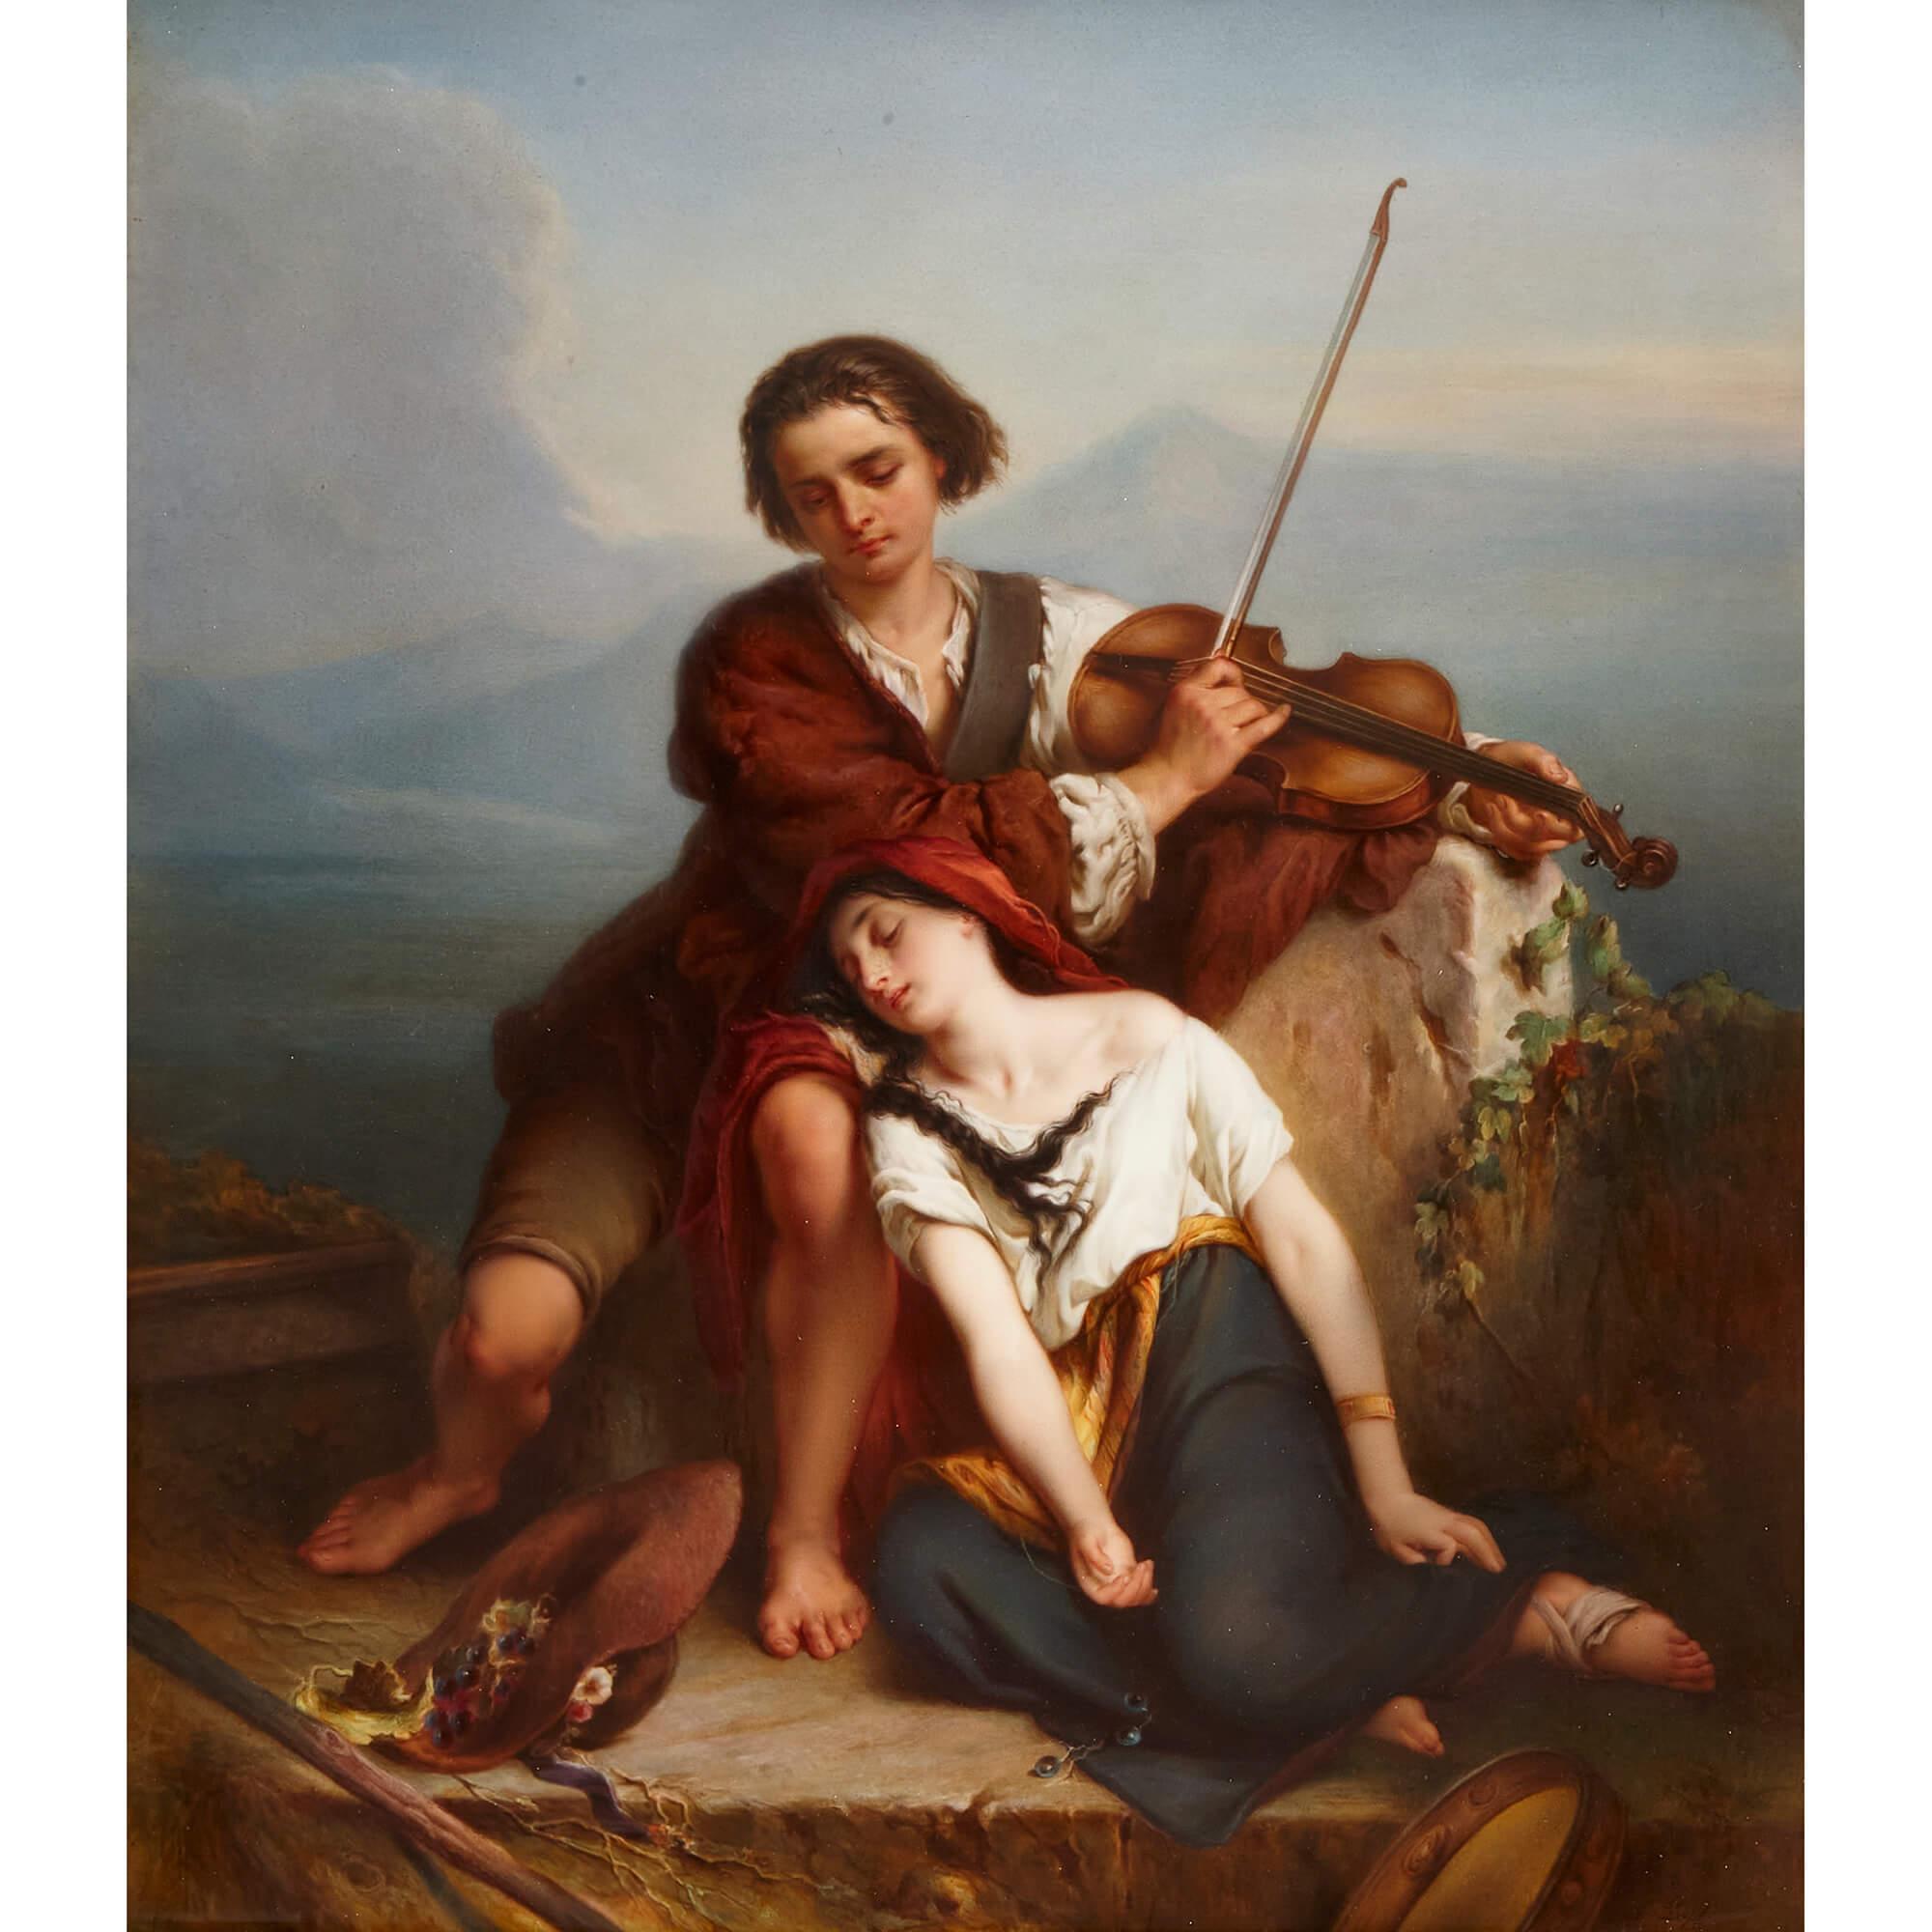 Large KPM porcelain plaque after Louis Gallait
German, Late 19th Century
Frame: height 53cm, width 48cm, depth 6cm
Plaque: height 40cm, width 35cm

Signed to the front lower right and with impressed KPM marks to reverse, this superb porcelain plaque